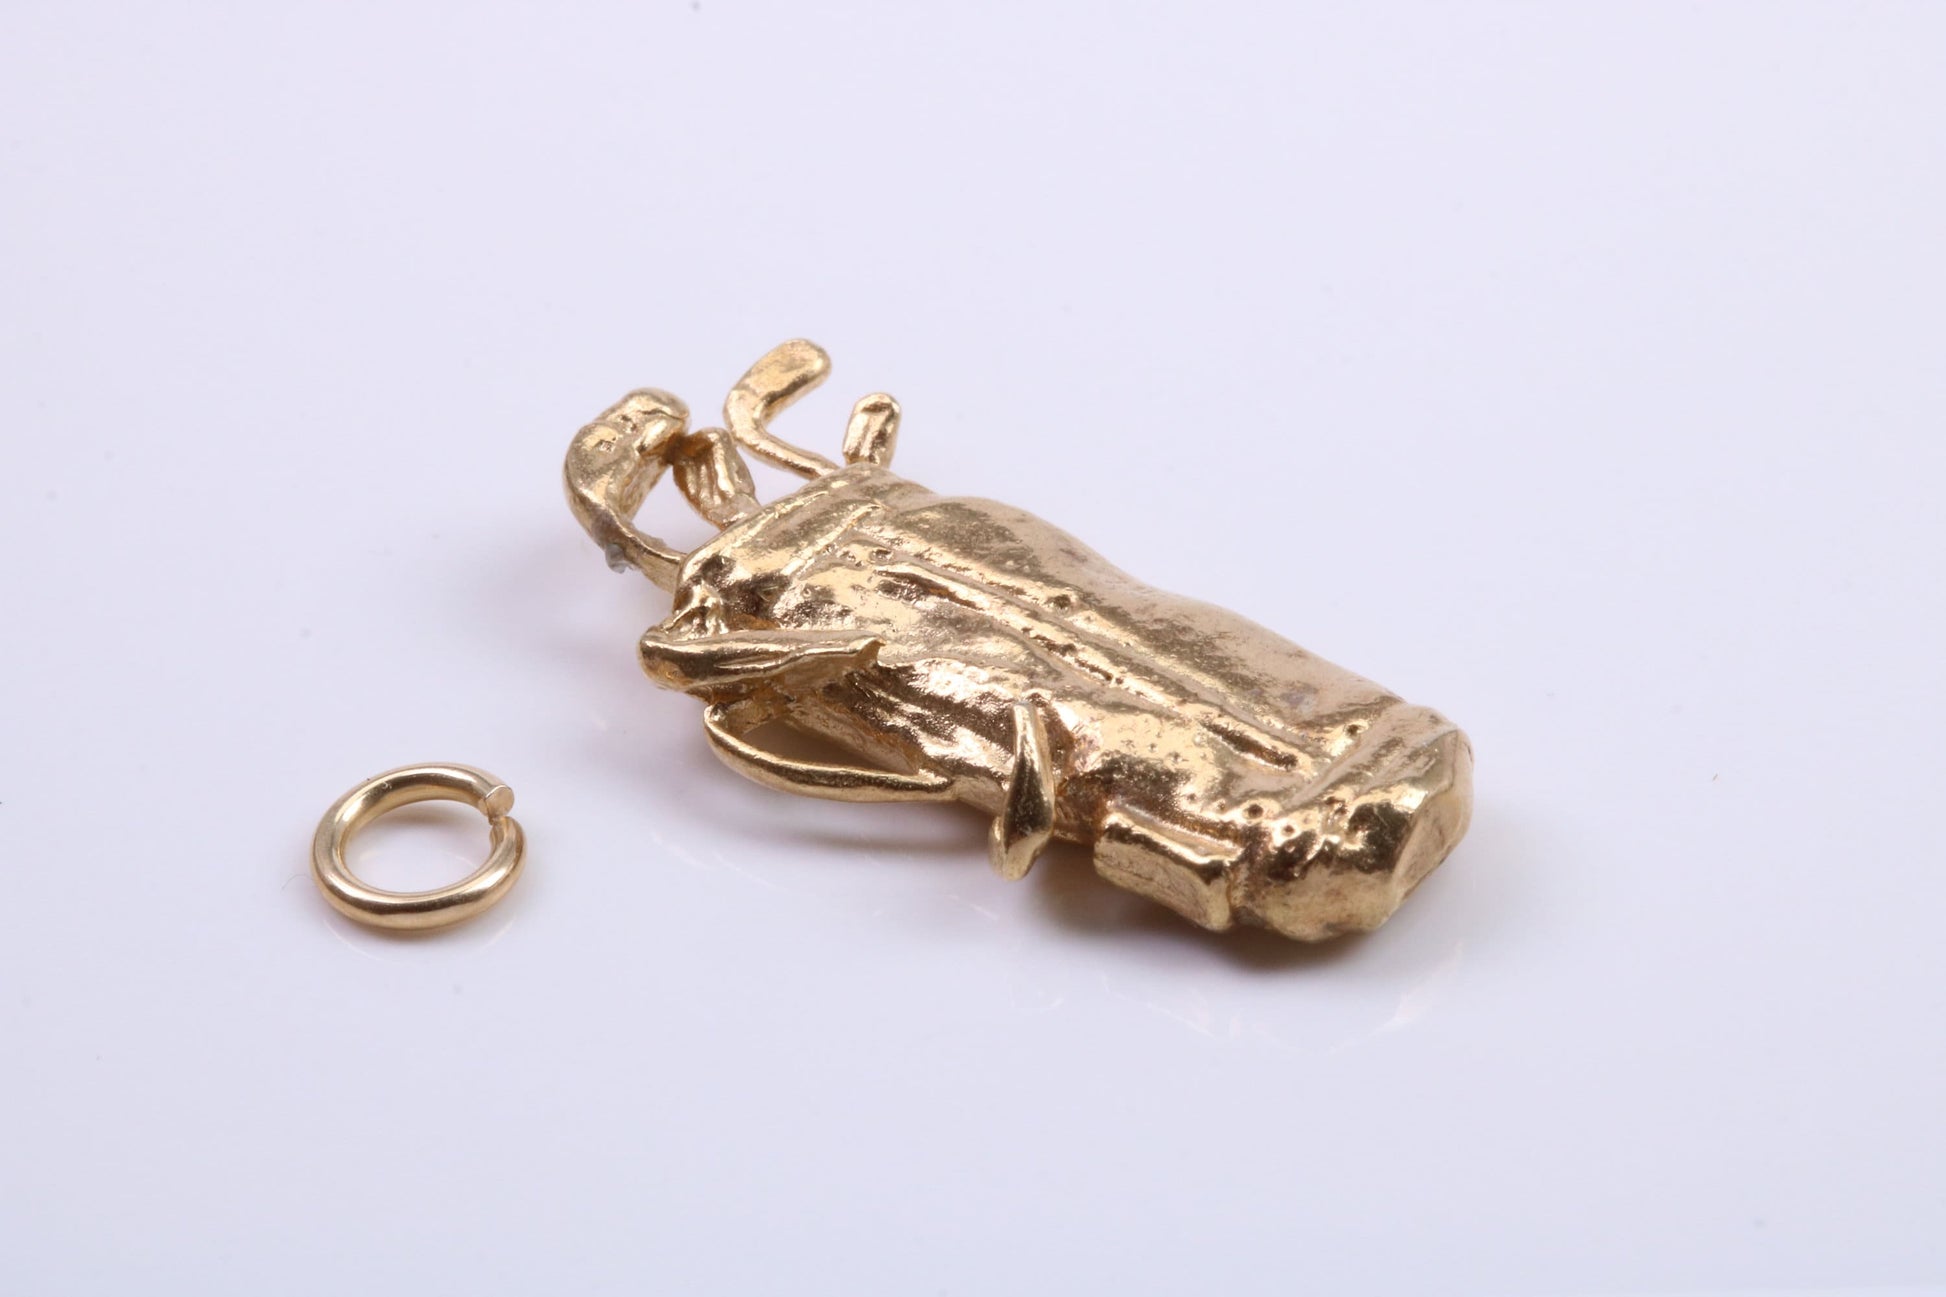 Golf Bag Charm, Traditional Charm, Made from Solid 9ct Yellow Gold, British Hallmarked, Complete with Attachment Link